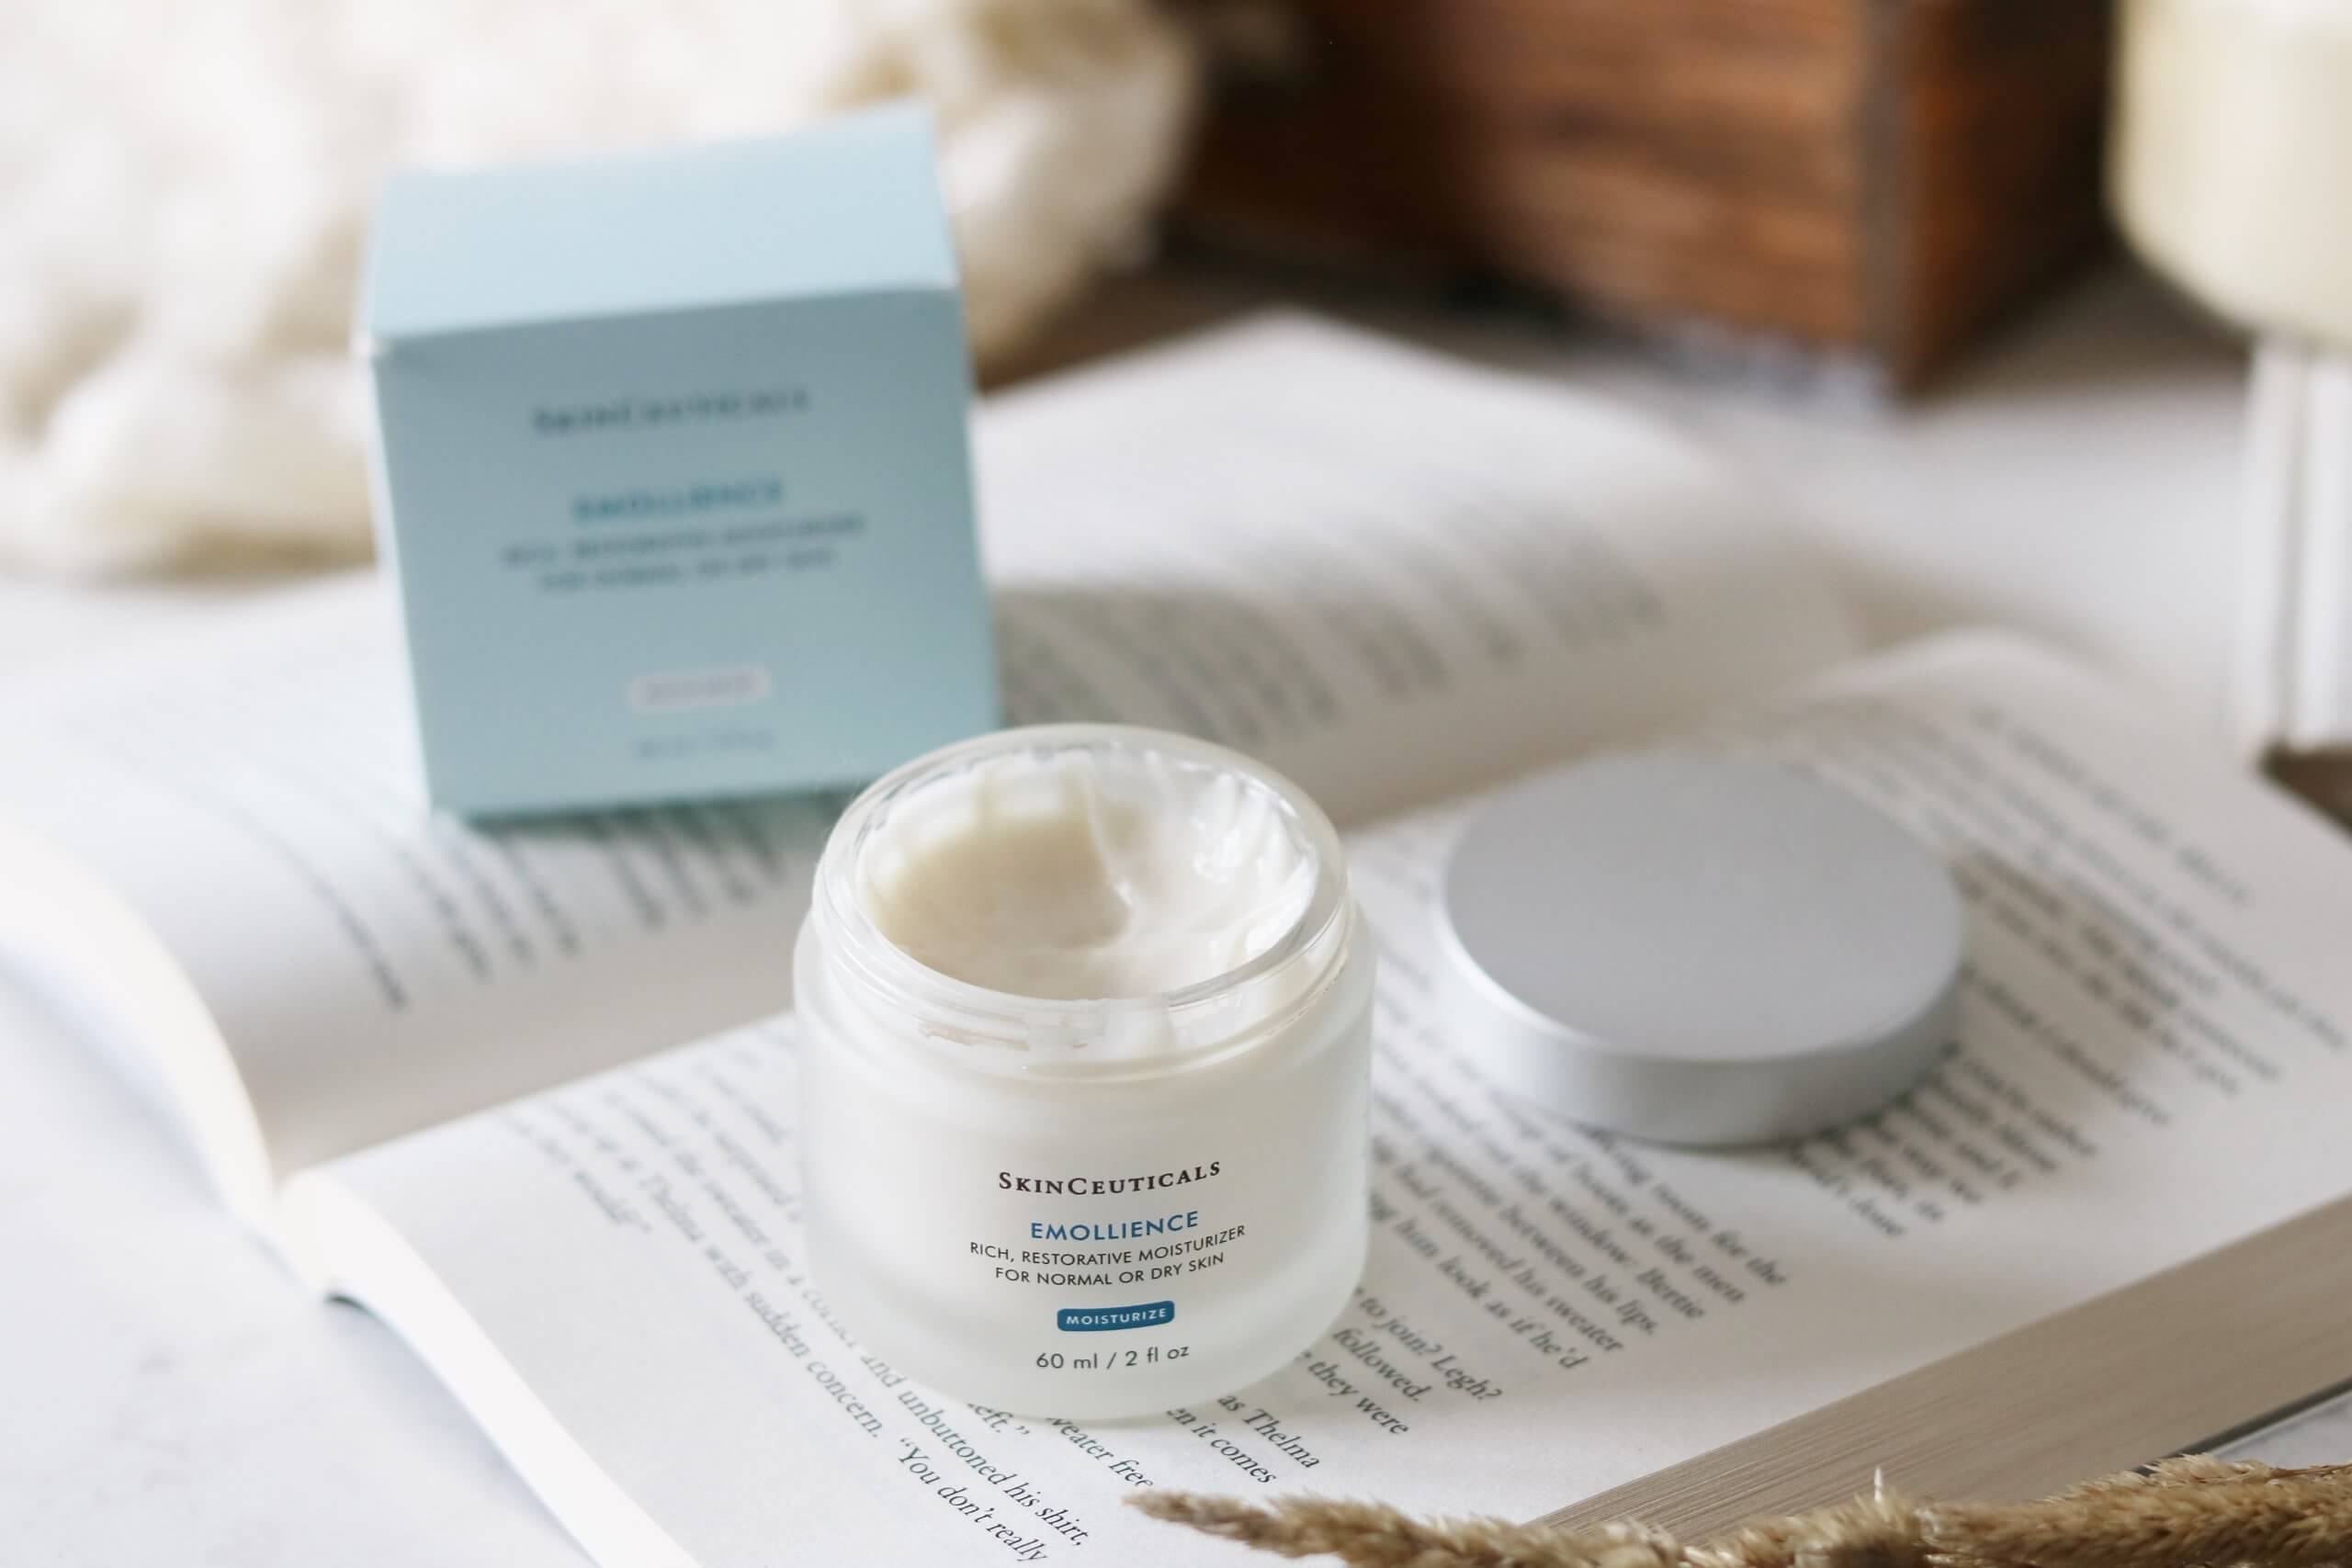 Fall skincare routine with SkinCeuticals; mandy furnis sparkleshinylove